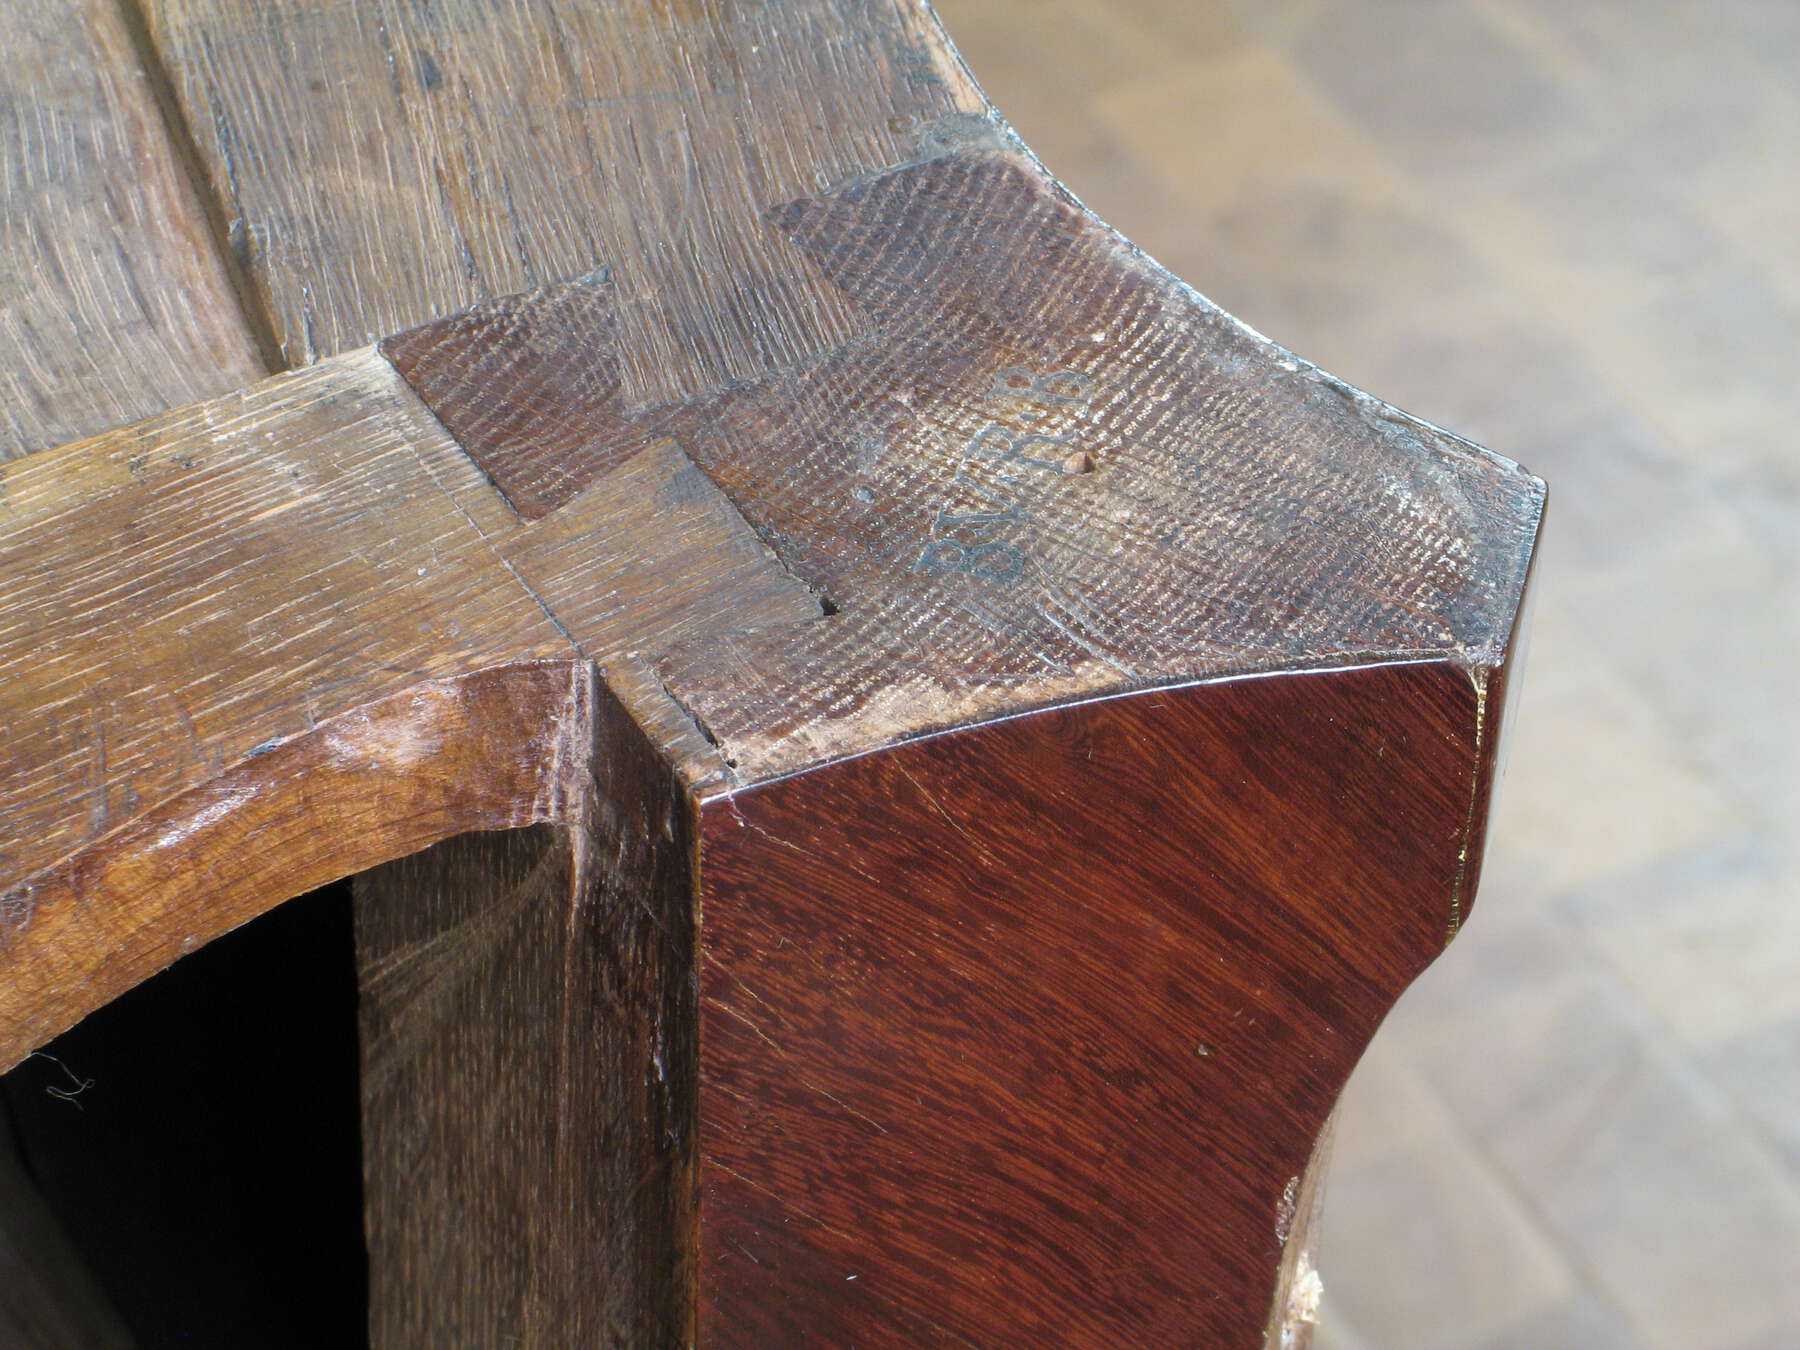 detail of the top of one of the leg joints, showing multicolored wooden pieces fitted tightly together